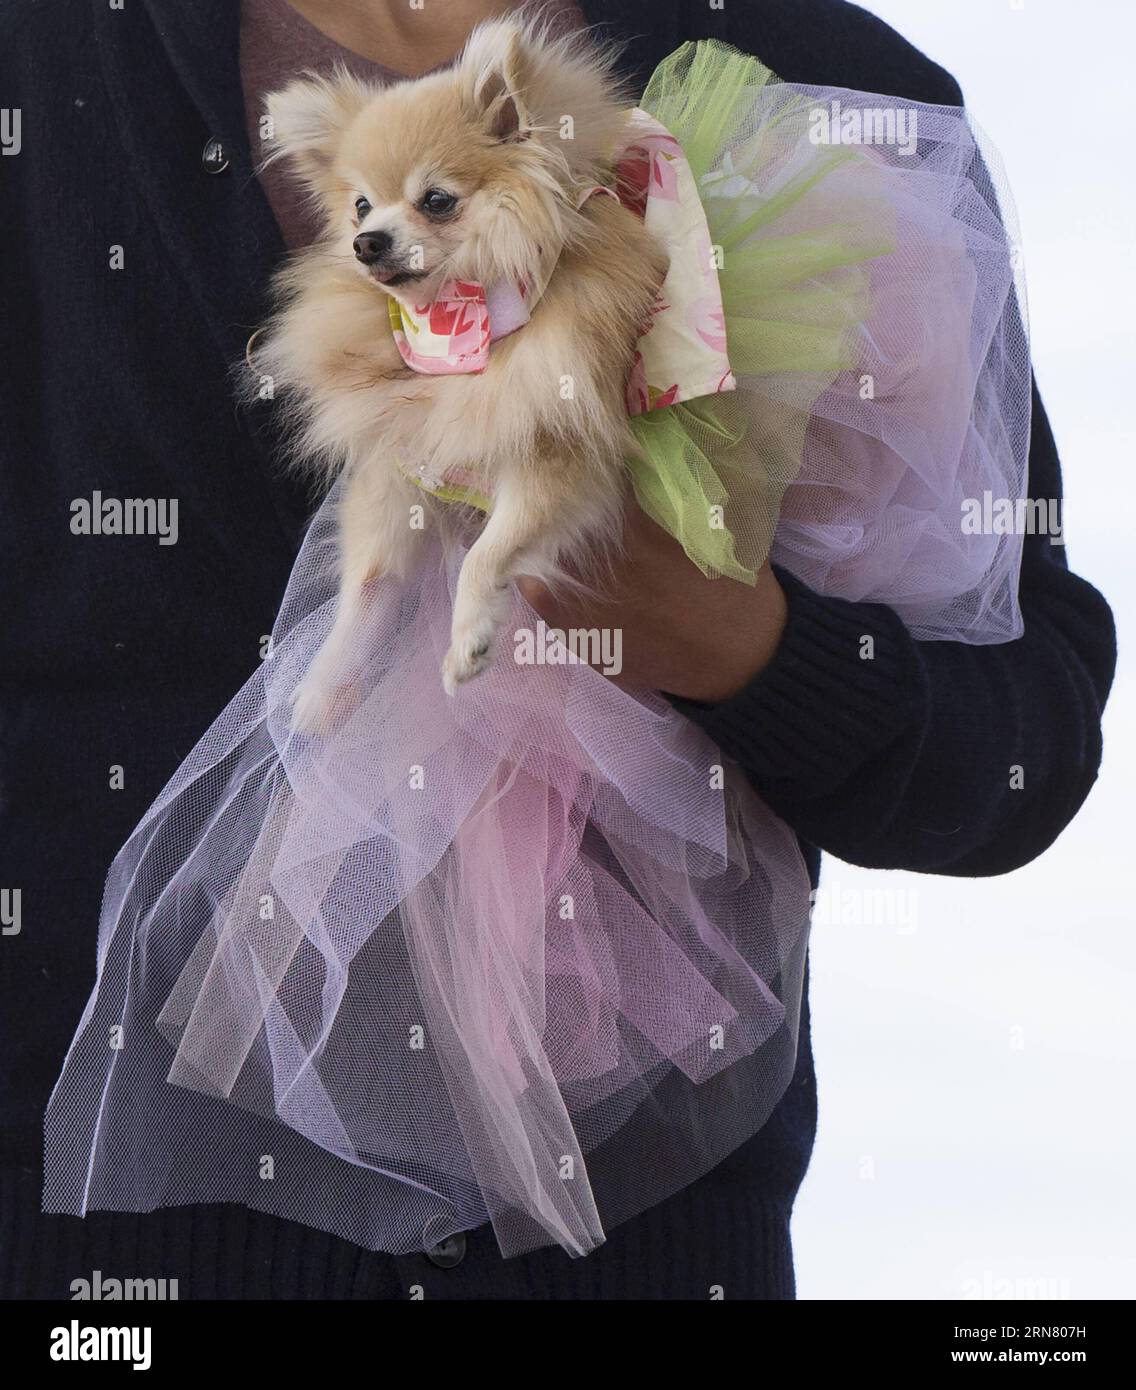 (150927) -- TORONTO, Sept. 27, 2015 -- A model displays a dressed up pet dog on stage during the fashion show event of the 2015 Woofstock at Woodbine Park in Toronto, Canada, Sept. 27, 2015. Woofstock is the largest outdoor festival for dogs in North America. ) CANADA-TORONTO-WOOFSTOCK-PET DOG-FASHION SHOW ZouxZheng PUBLICATIONxNOTxINxCHN   Toronto Sept 27 2015 a Model Displays a Dressed up Pet Dog ON Stage during The Fashion Show Event of The 2015 Woofstock AT Woodbine Park in Toronto Canada Sept 27 2015 Woofstock IS The Largest Outdoor Festival for Dogs in North America Canada Toronto Woofst Stock Photo